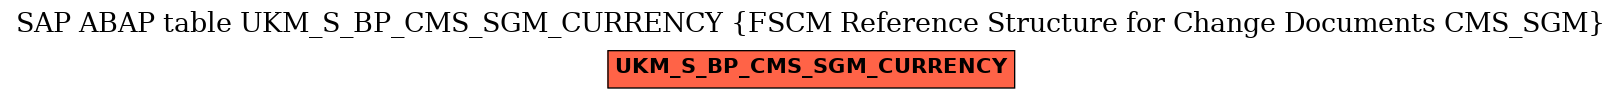 E-R Diagram for table UKM_S_BP_CMS_SGM_CURRENCY (FSCM Reference Structure for Change Documents CMS_SGM)